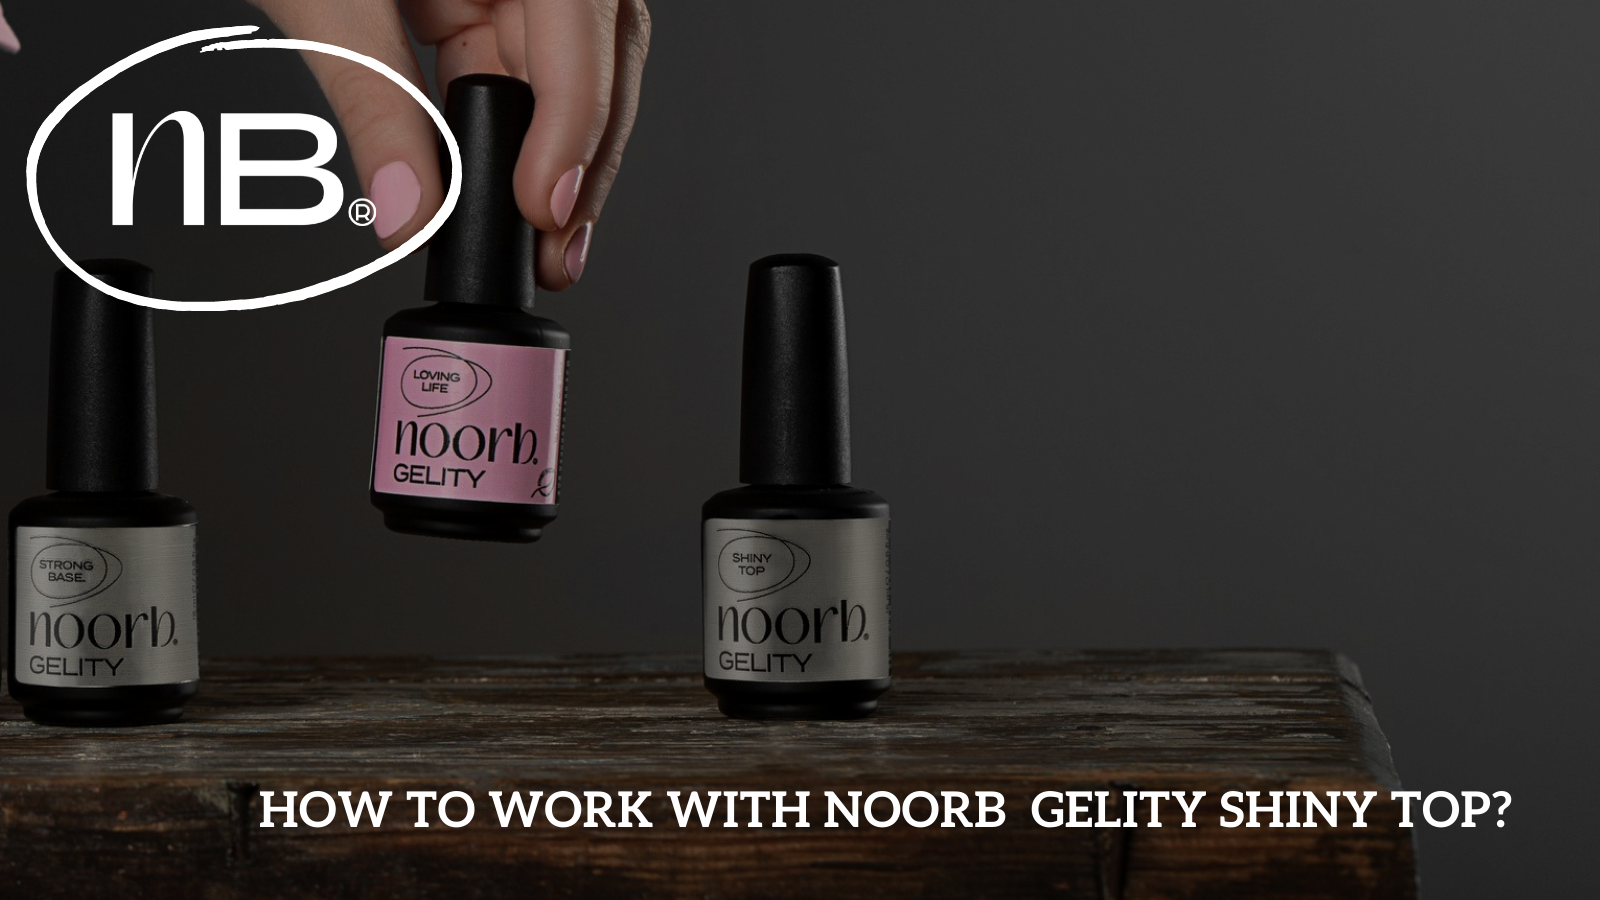 How to work with noorb gelity shiny top?